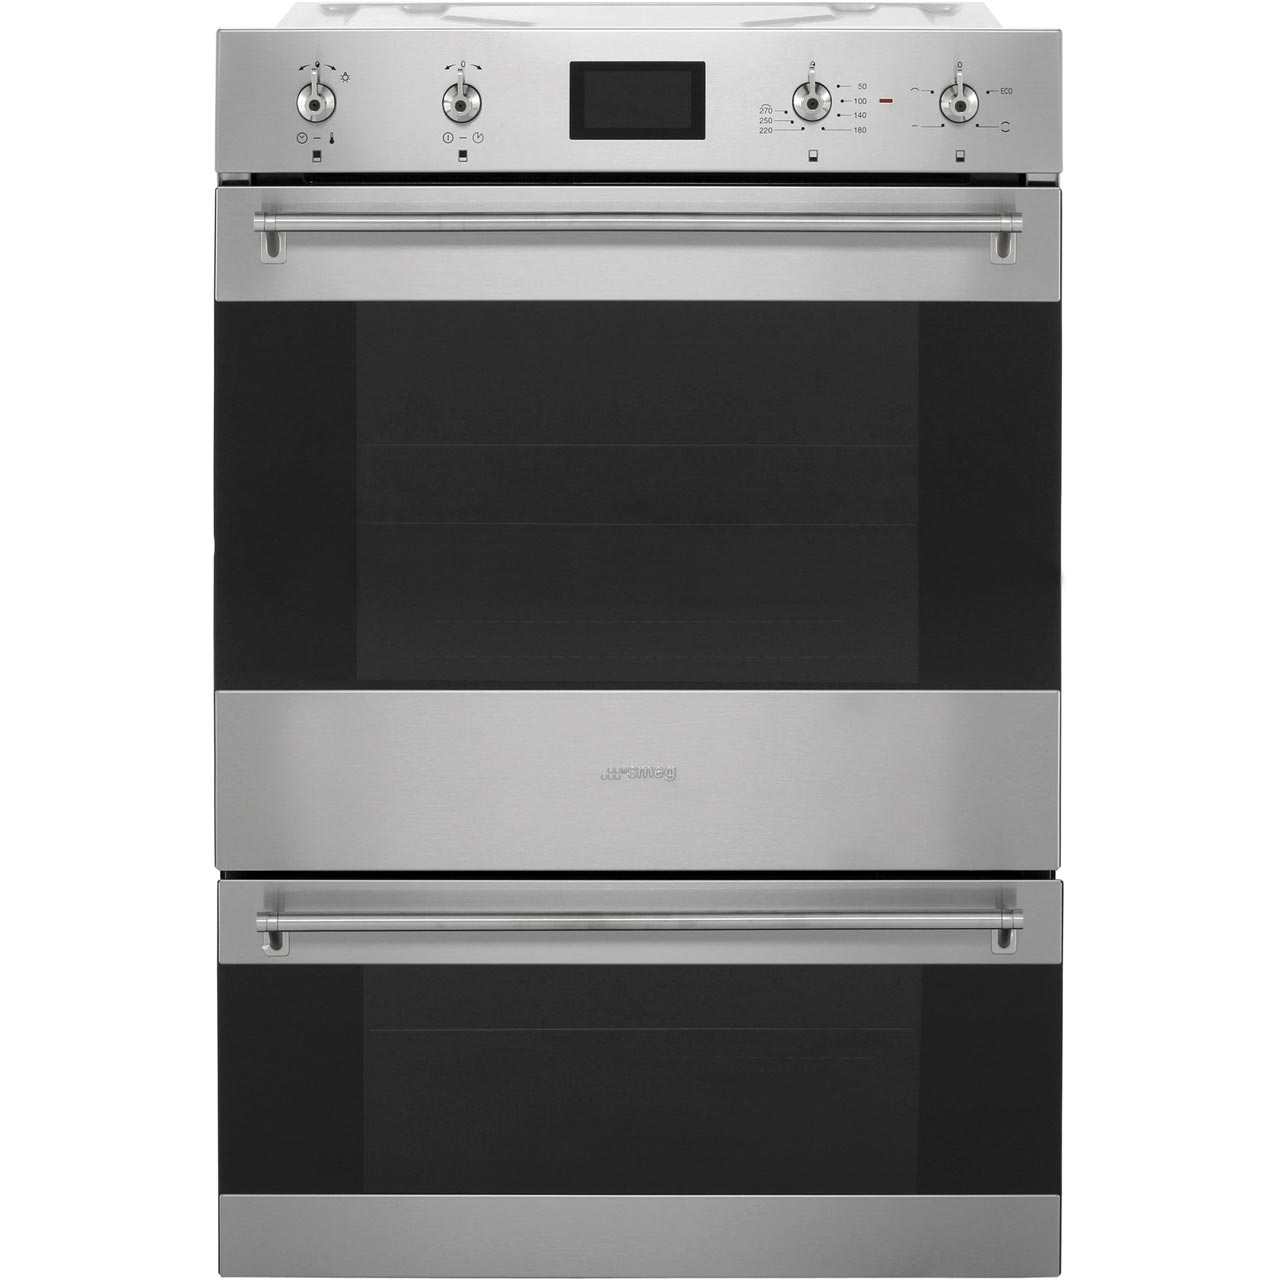 Smeg Classic DOSP6390X Built In Electric Double Oven with Pyrolytic Cleaning - Stainless Steel - A/A Rated, Stainless Steel